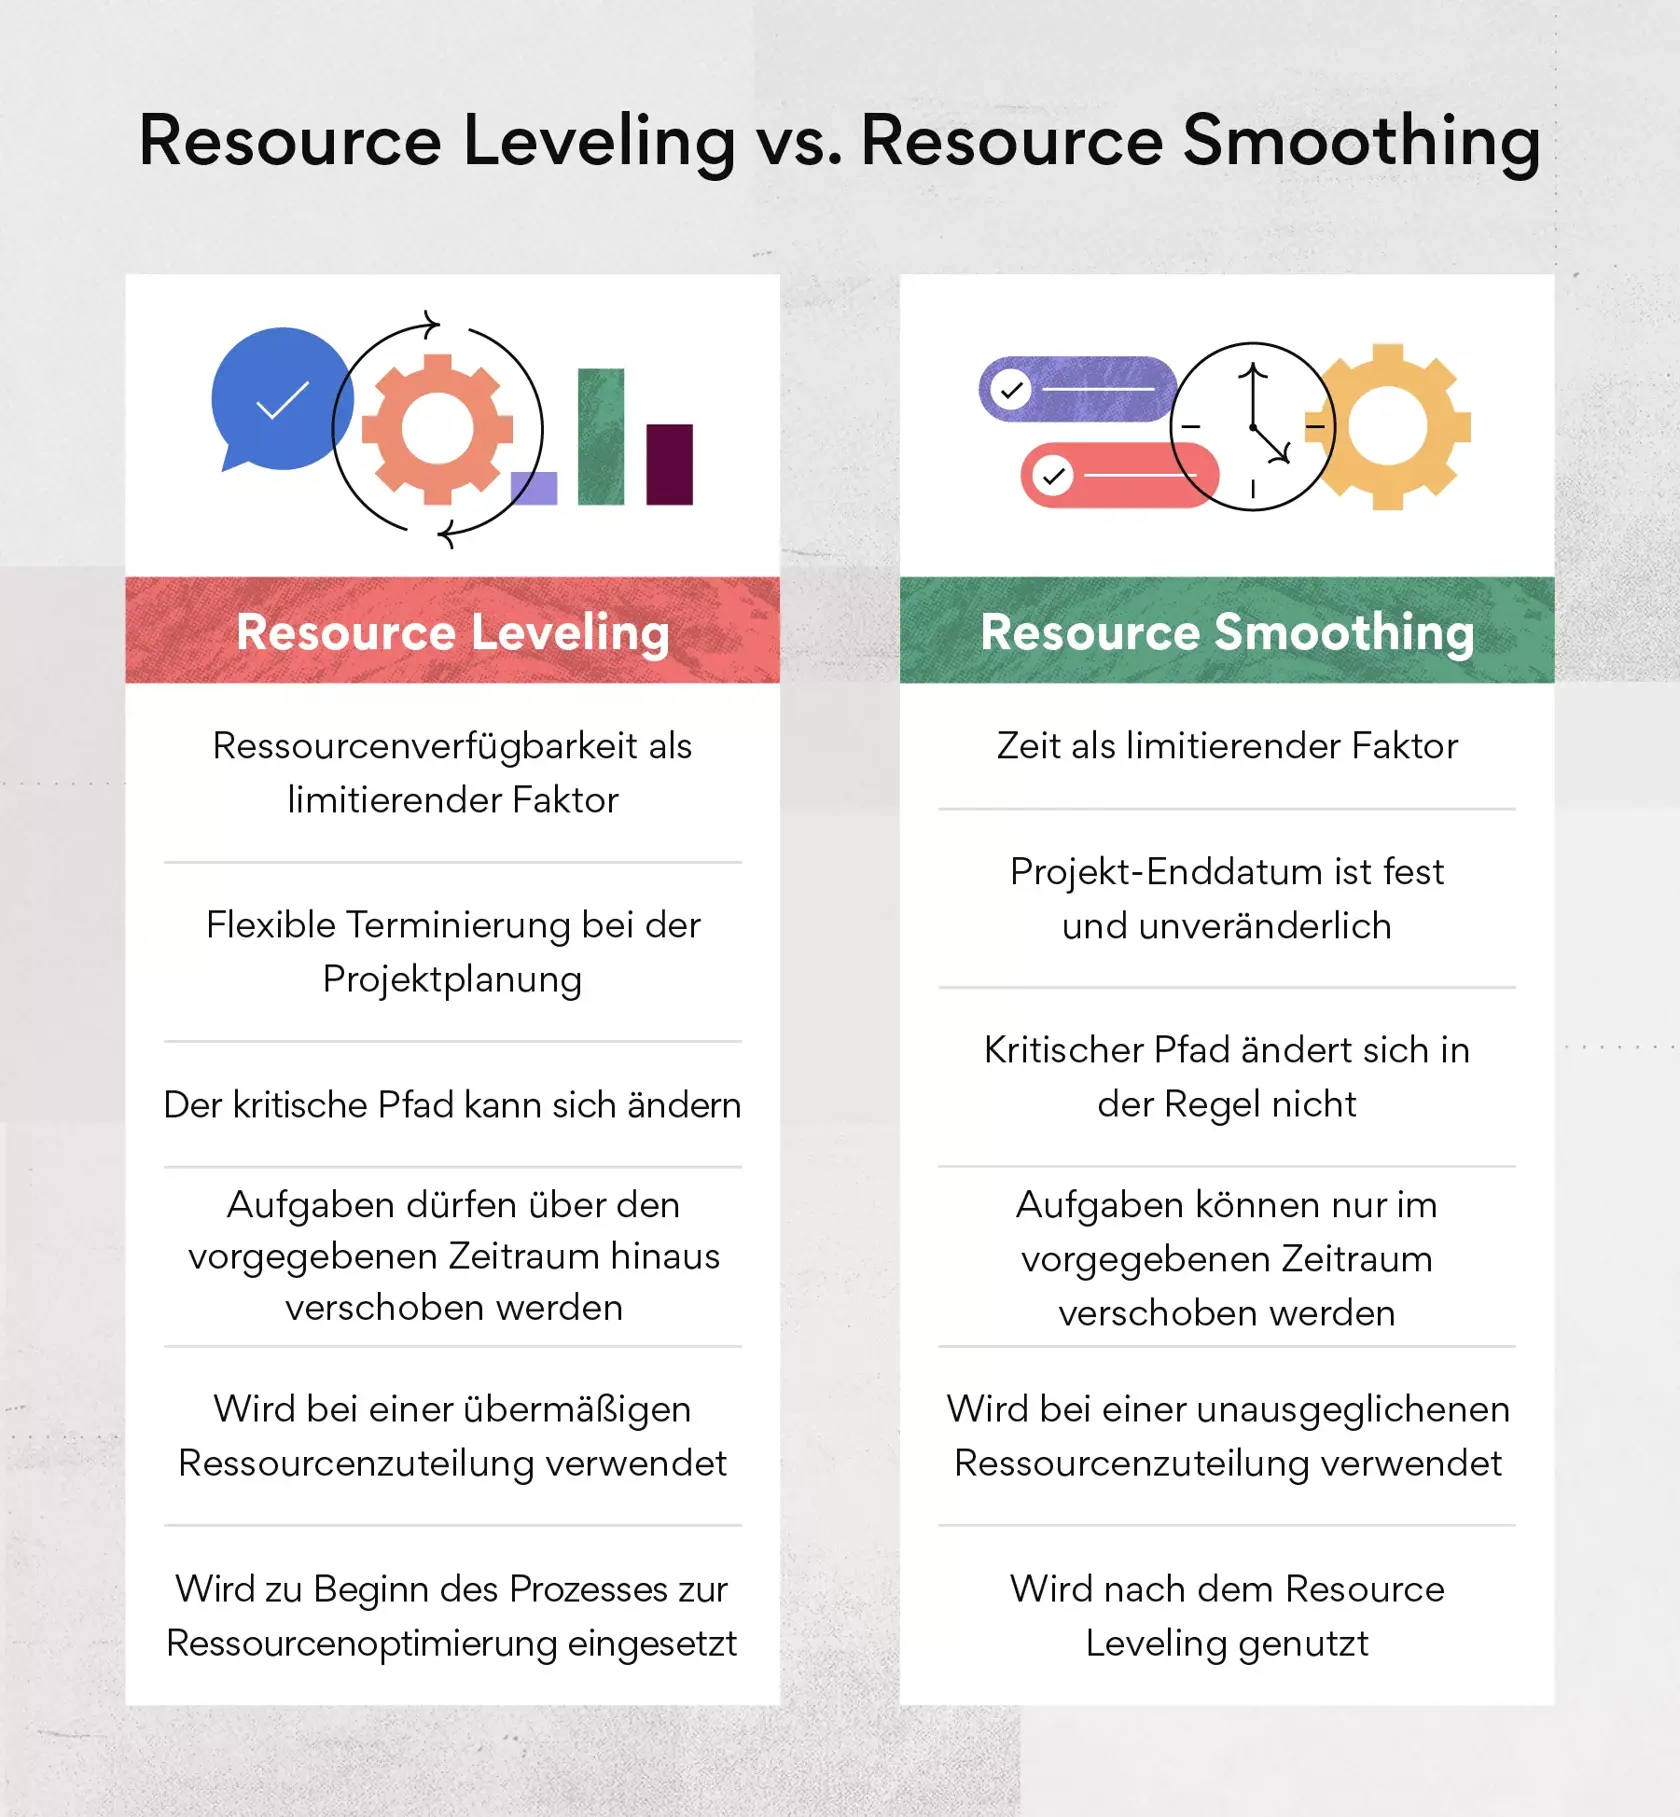 Resource Leveling vs. Resource Smoothing